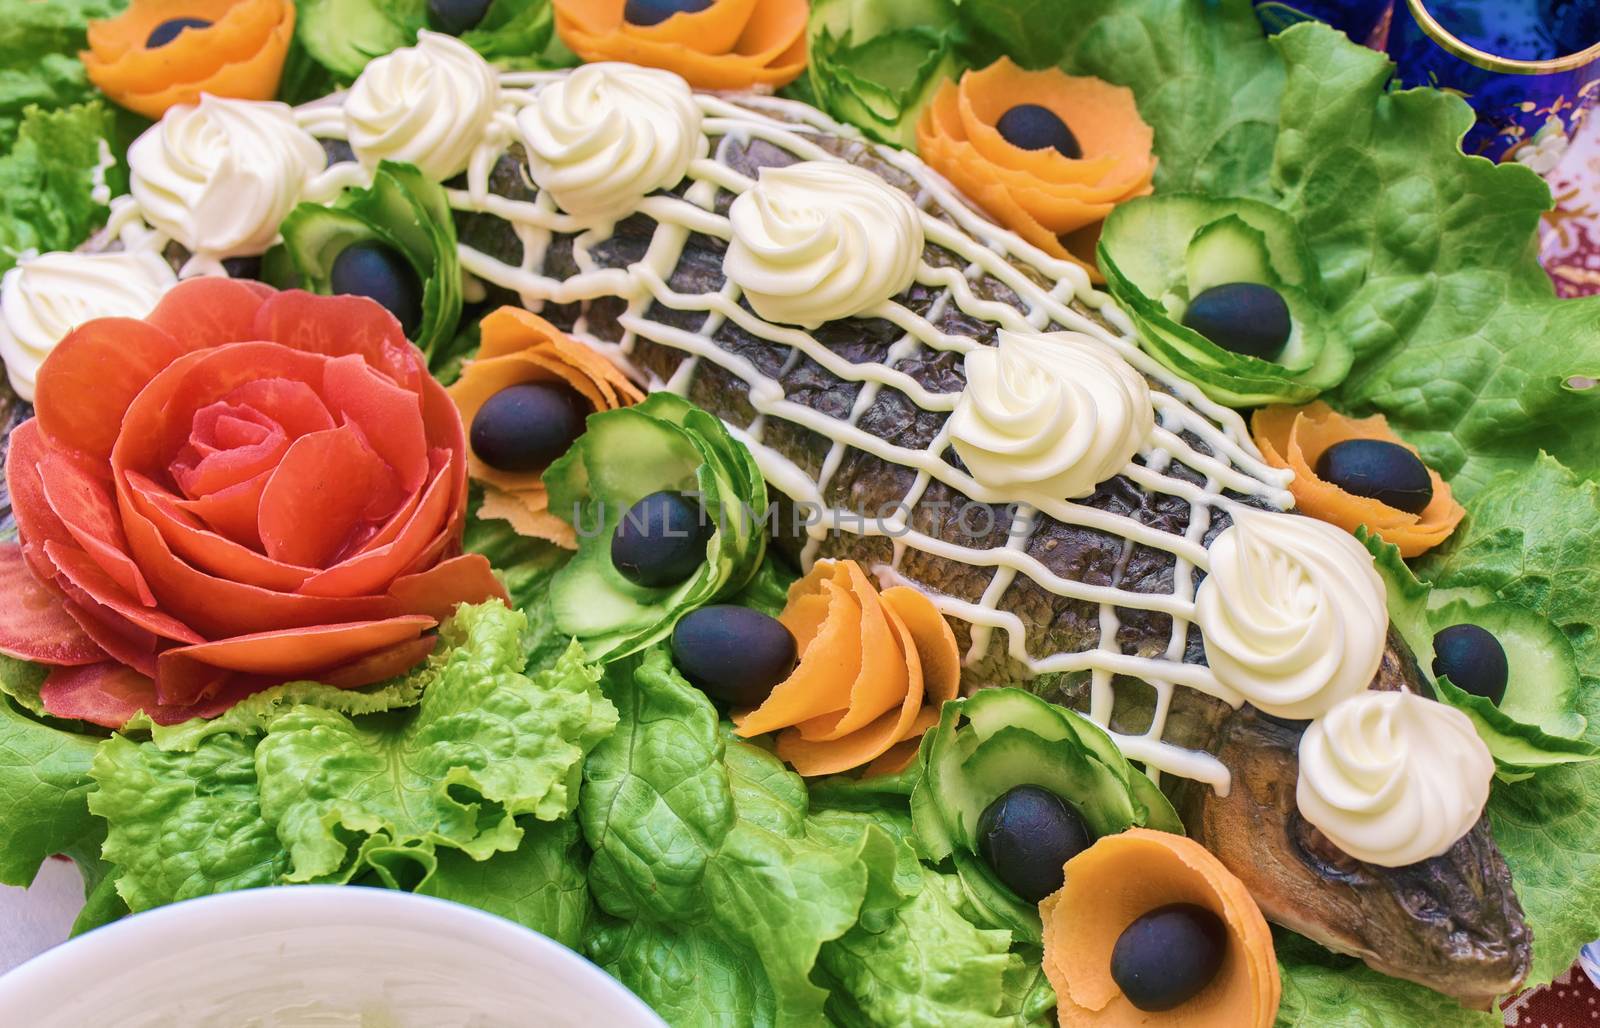 Baked fish decorated with vegetables. Fish and vegetables on the table.